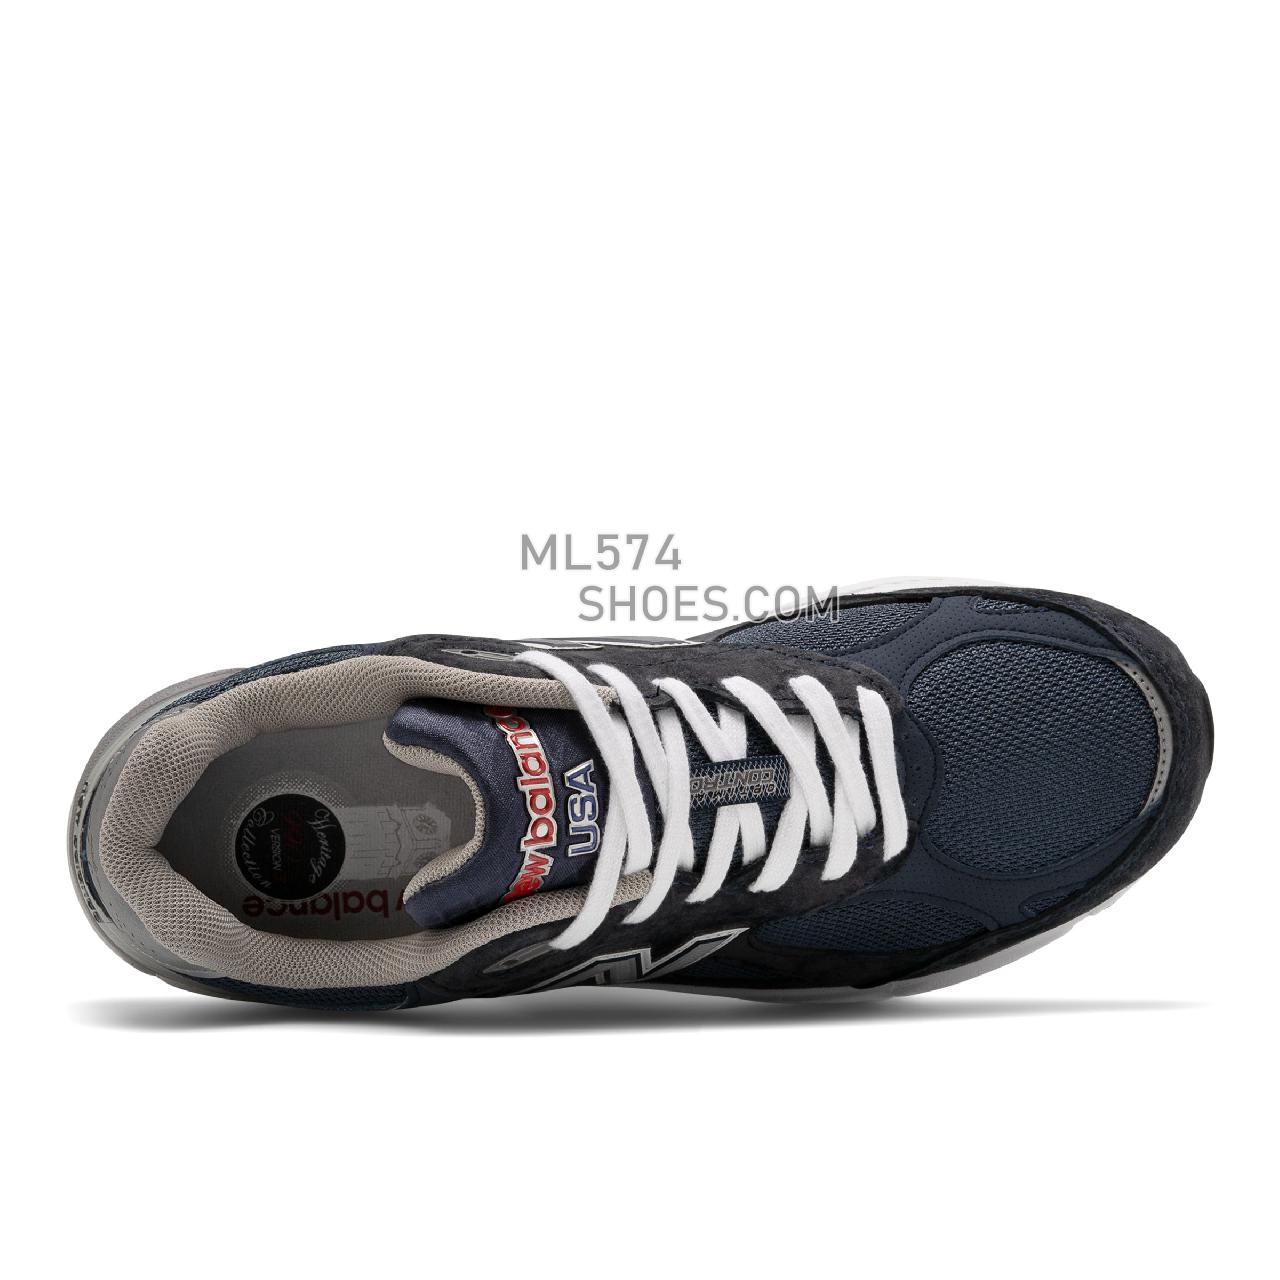 New Balance Made in USA 990v3 - Men's Made in USA And UK Sneakers - Navy with White - M990NB3